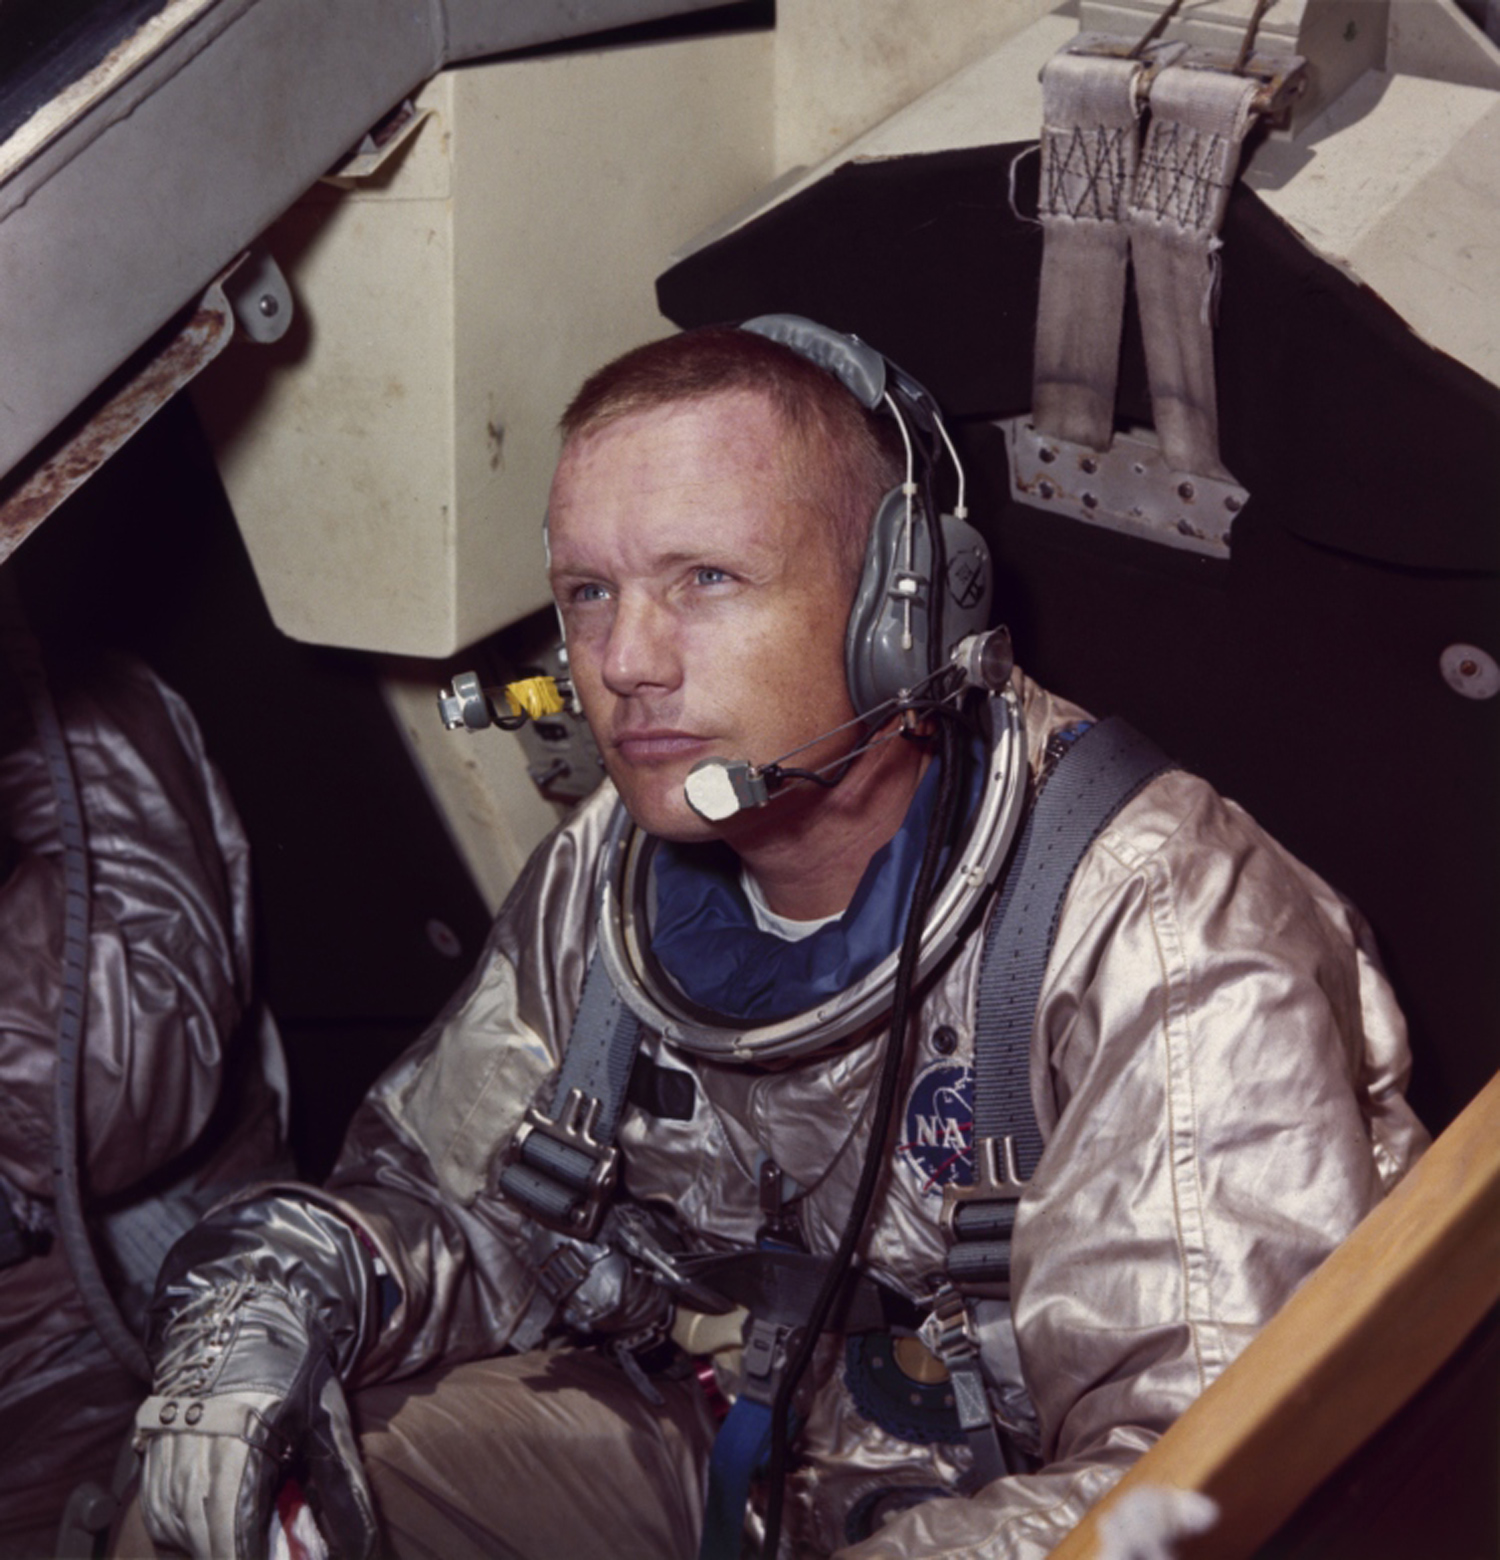 Neil Armstrong, commander of the Apollo 11 mission to moon, in training for his work on the lunar surface, 1969.